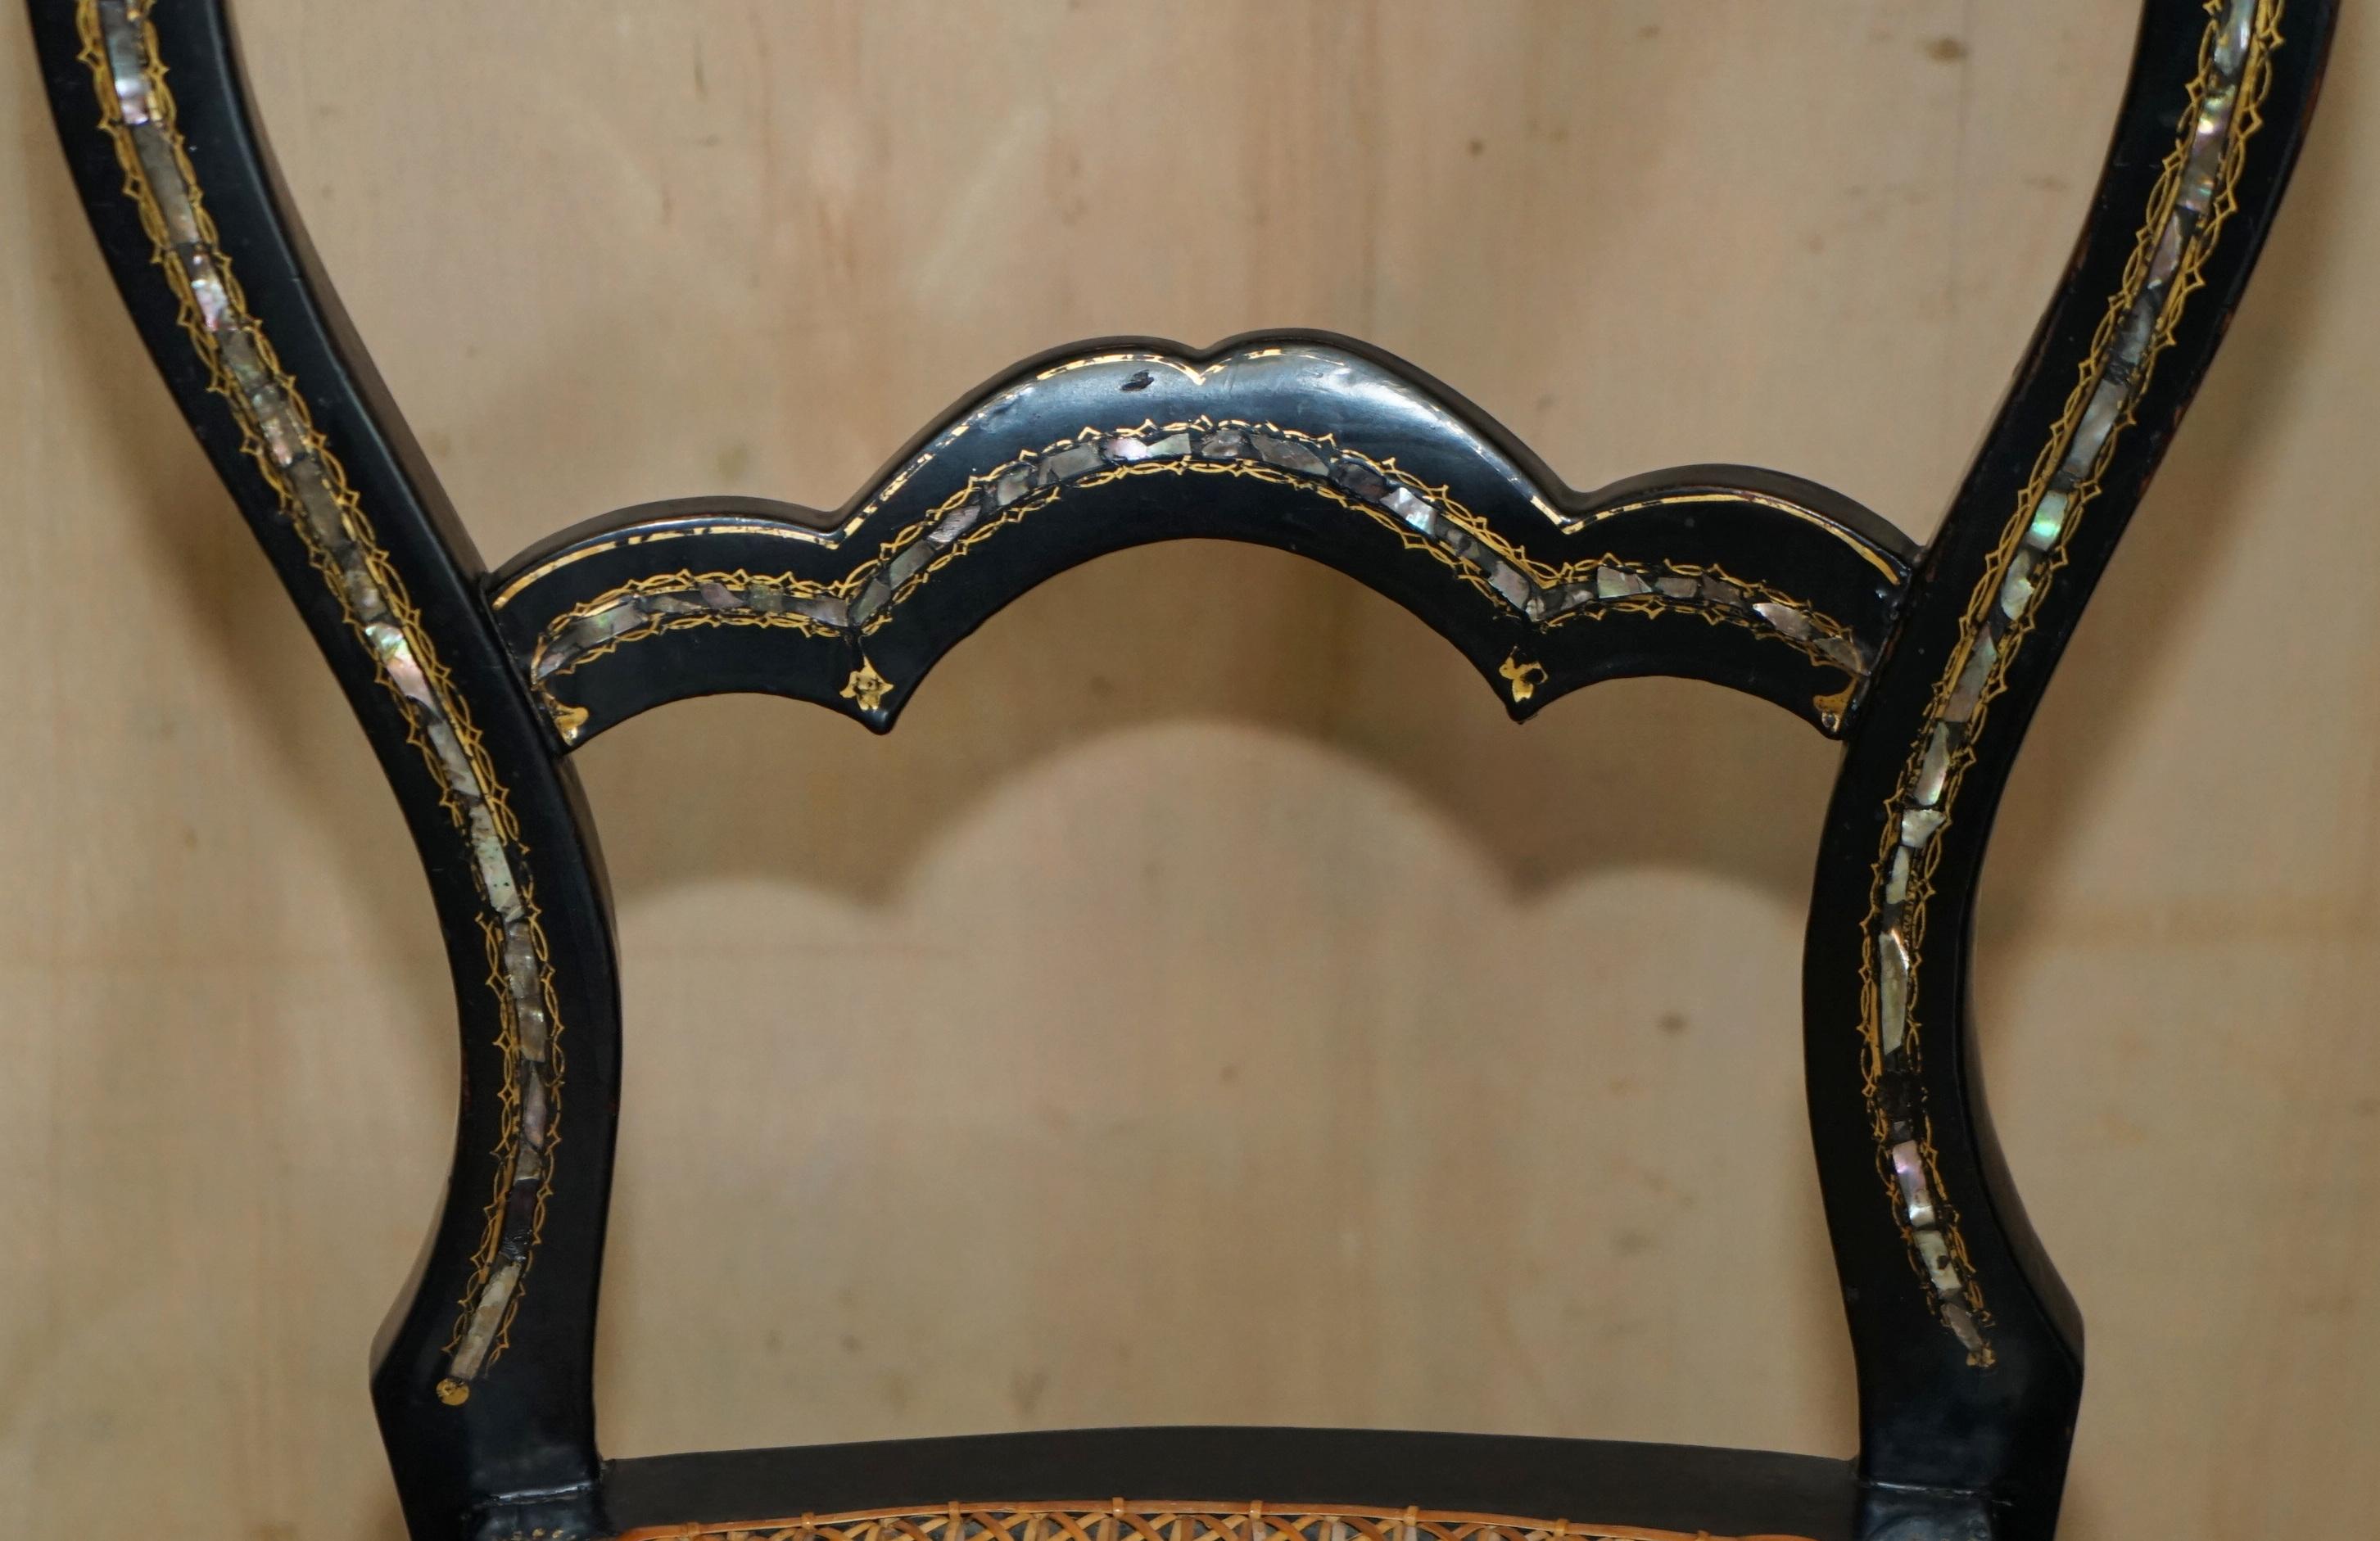 VIER FINE UND ANTIQUE REGENCY BERGERE MOTHER OF PEARL EBONISED SIDE CHAIRs (Rattan) im Angebot